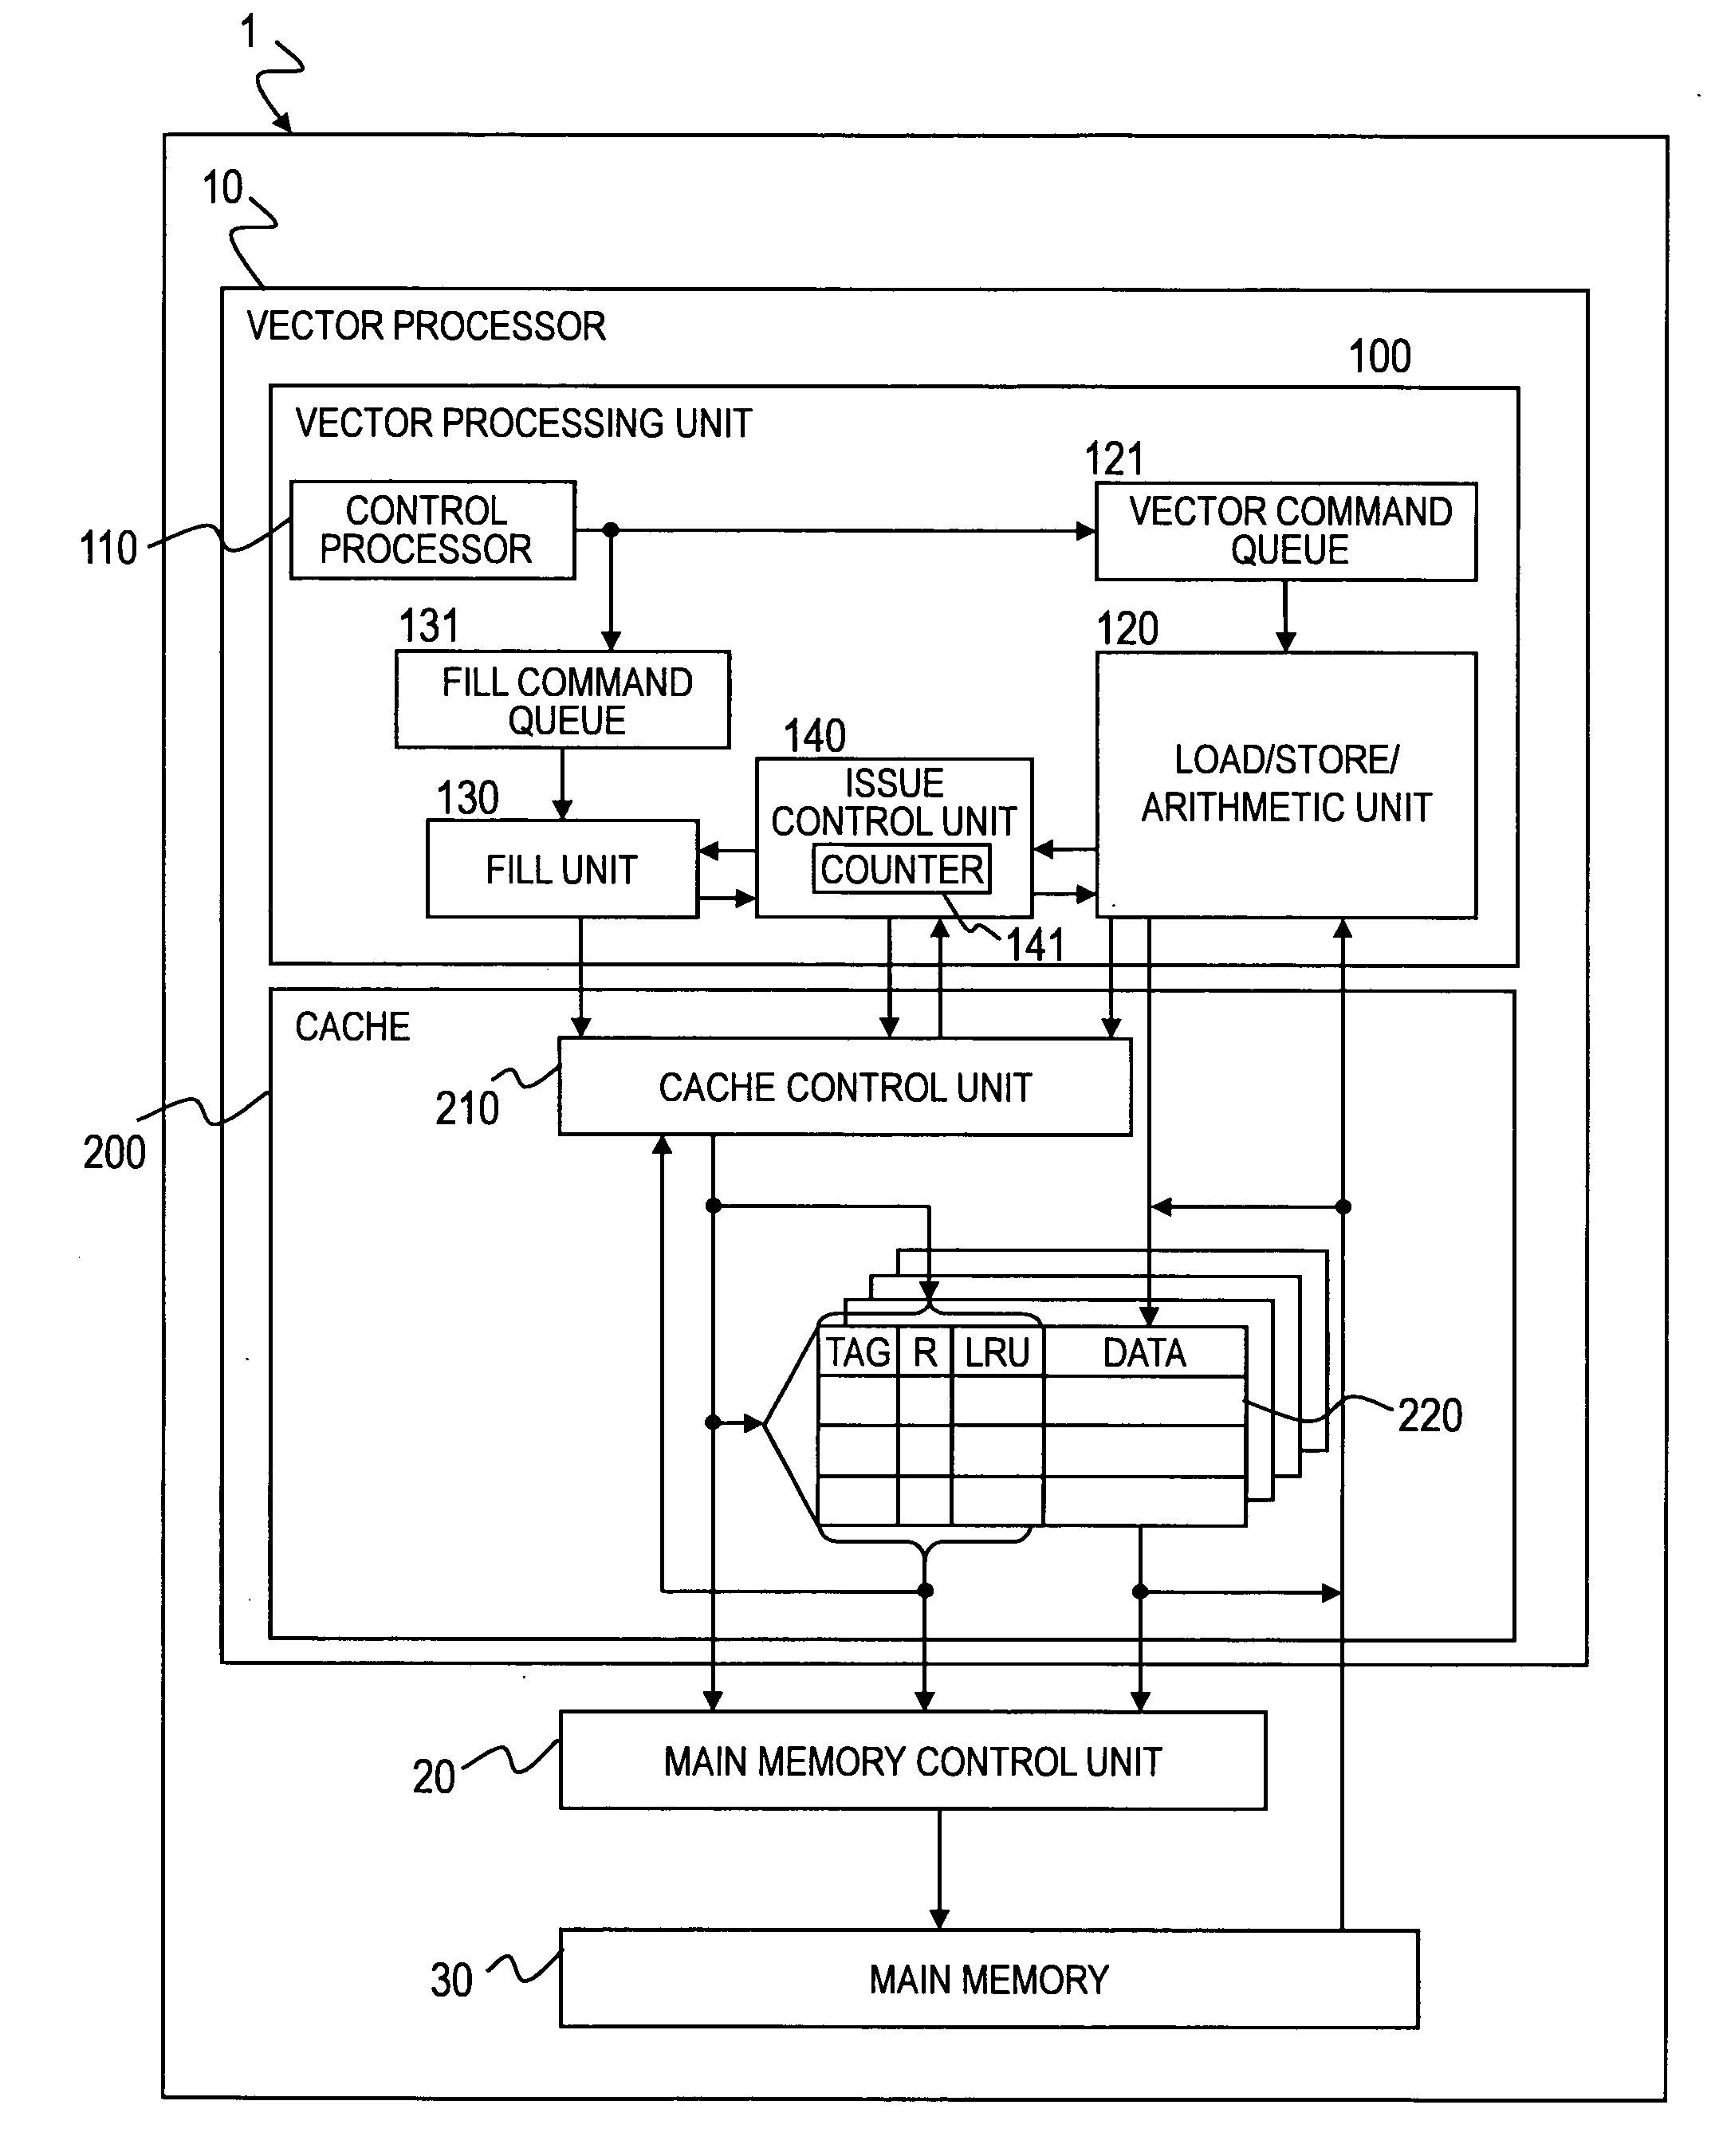 Processor with prefetch function